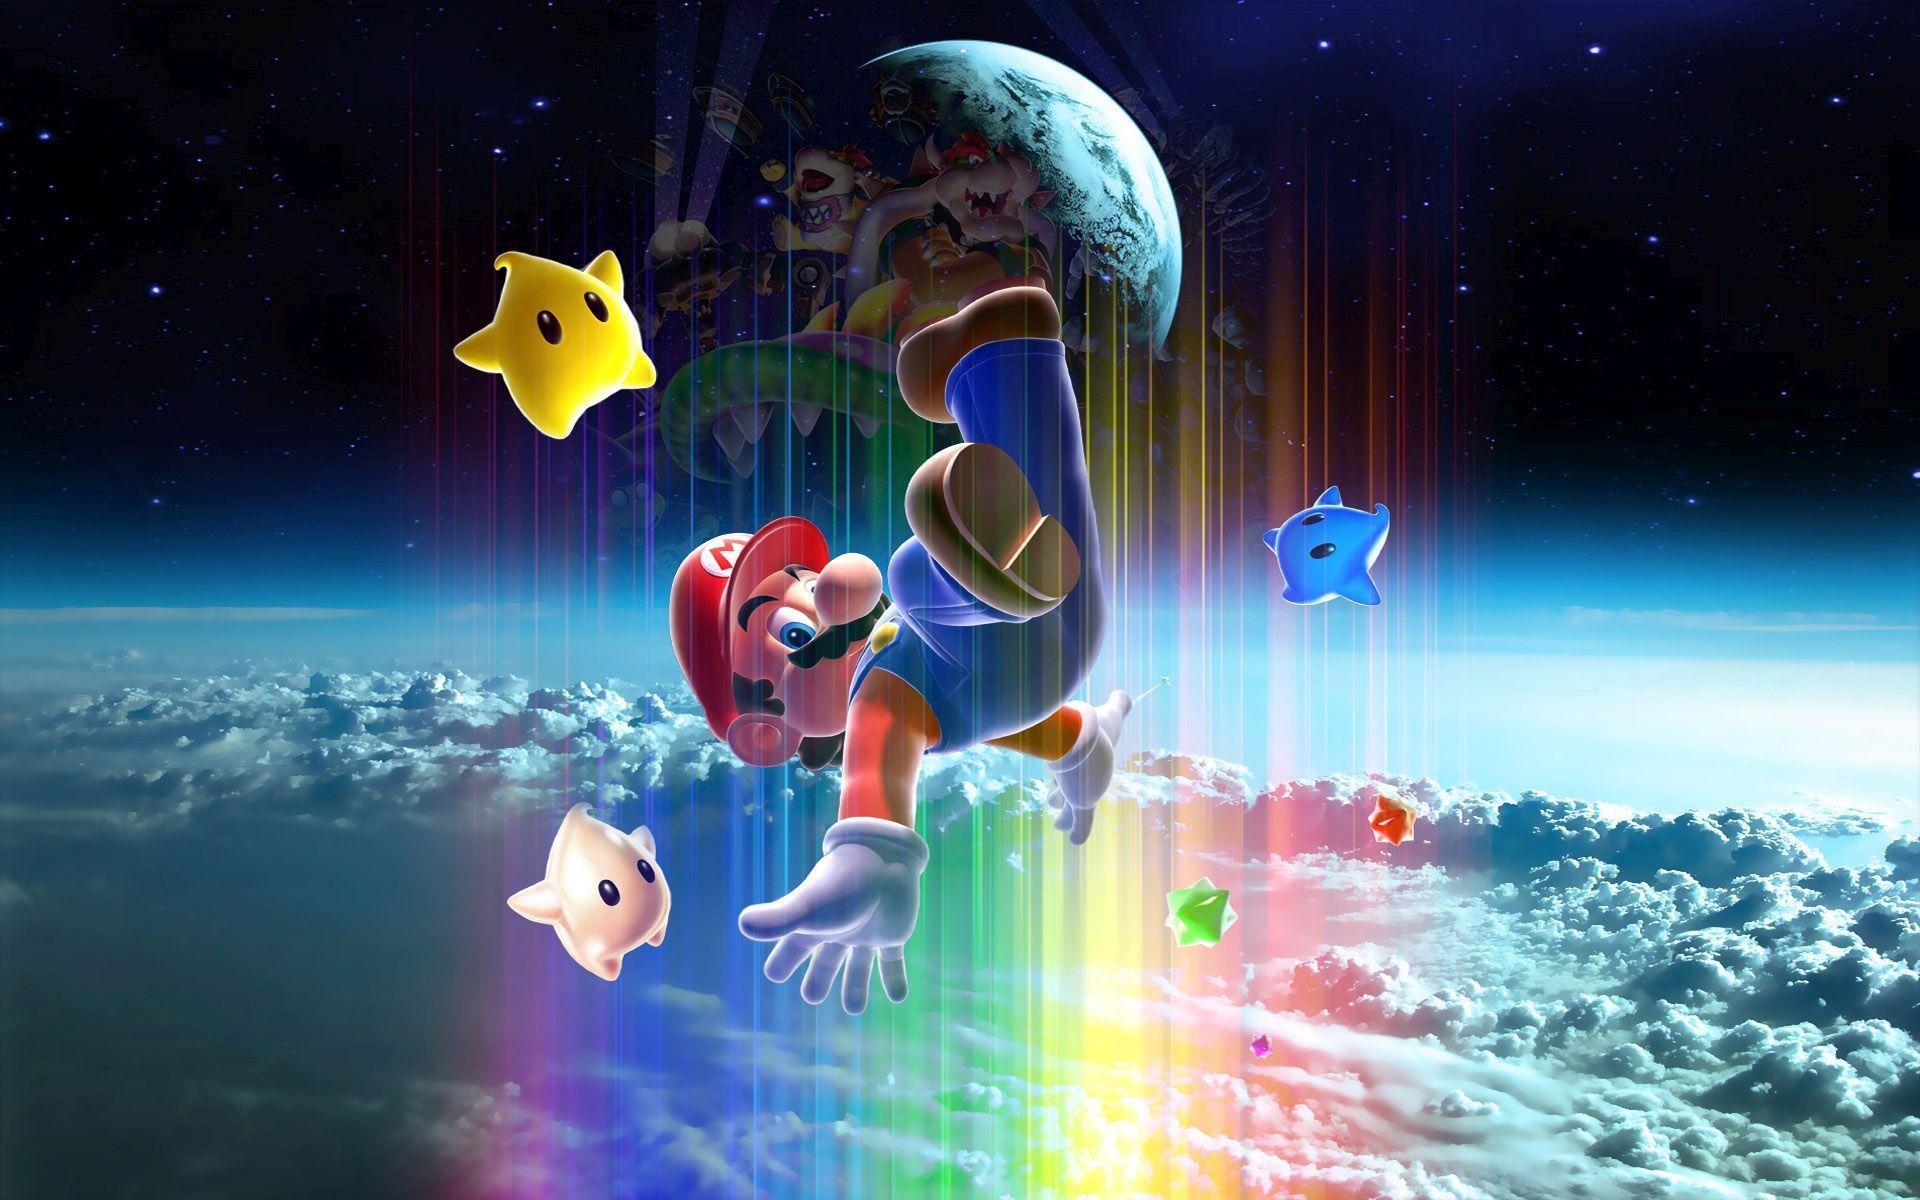 Super Mario Galaxy 2K Wallpapers and Backgrounds Wallpaper